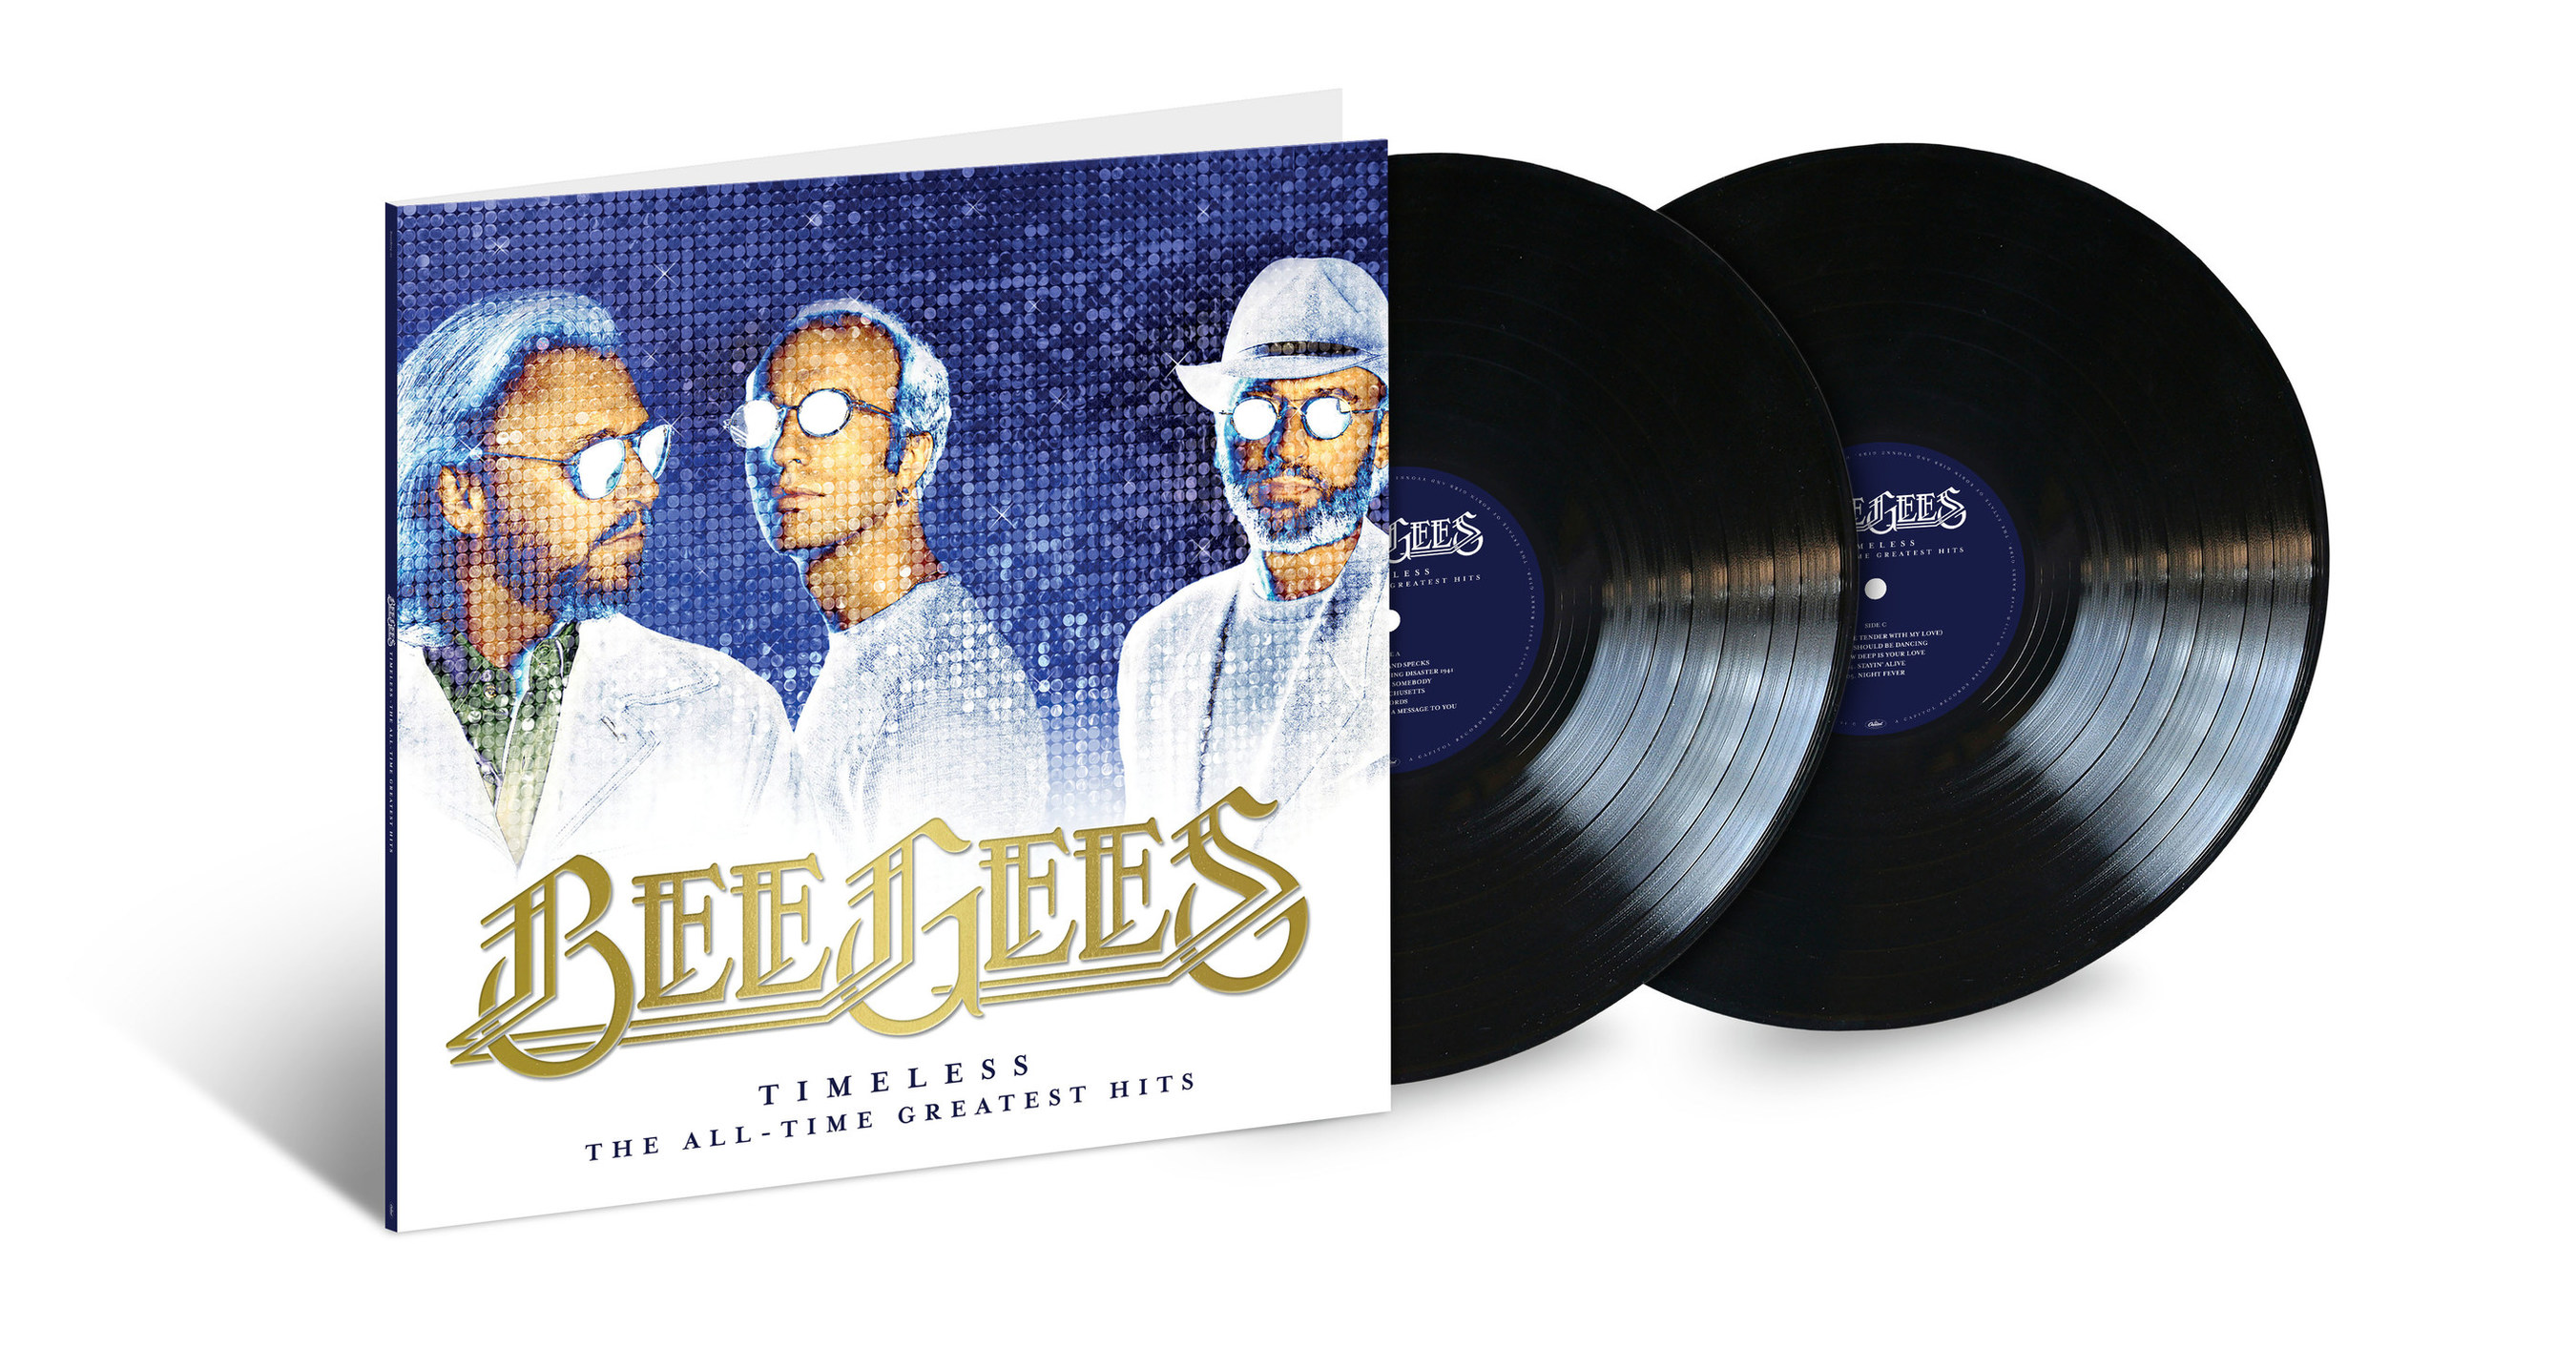 /PRNewswire/ -- On October 26, Capitol/UMe will release the Bee Gees' ...